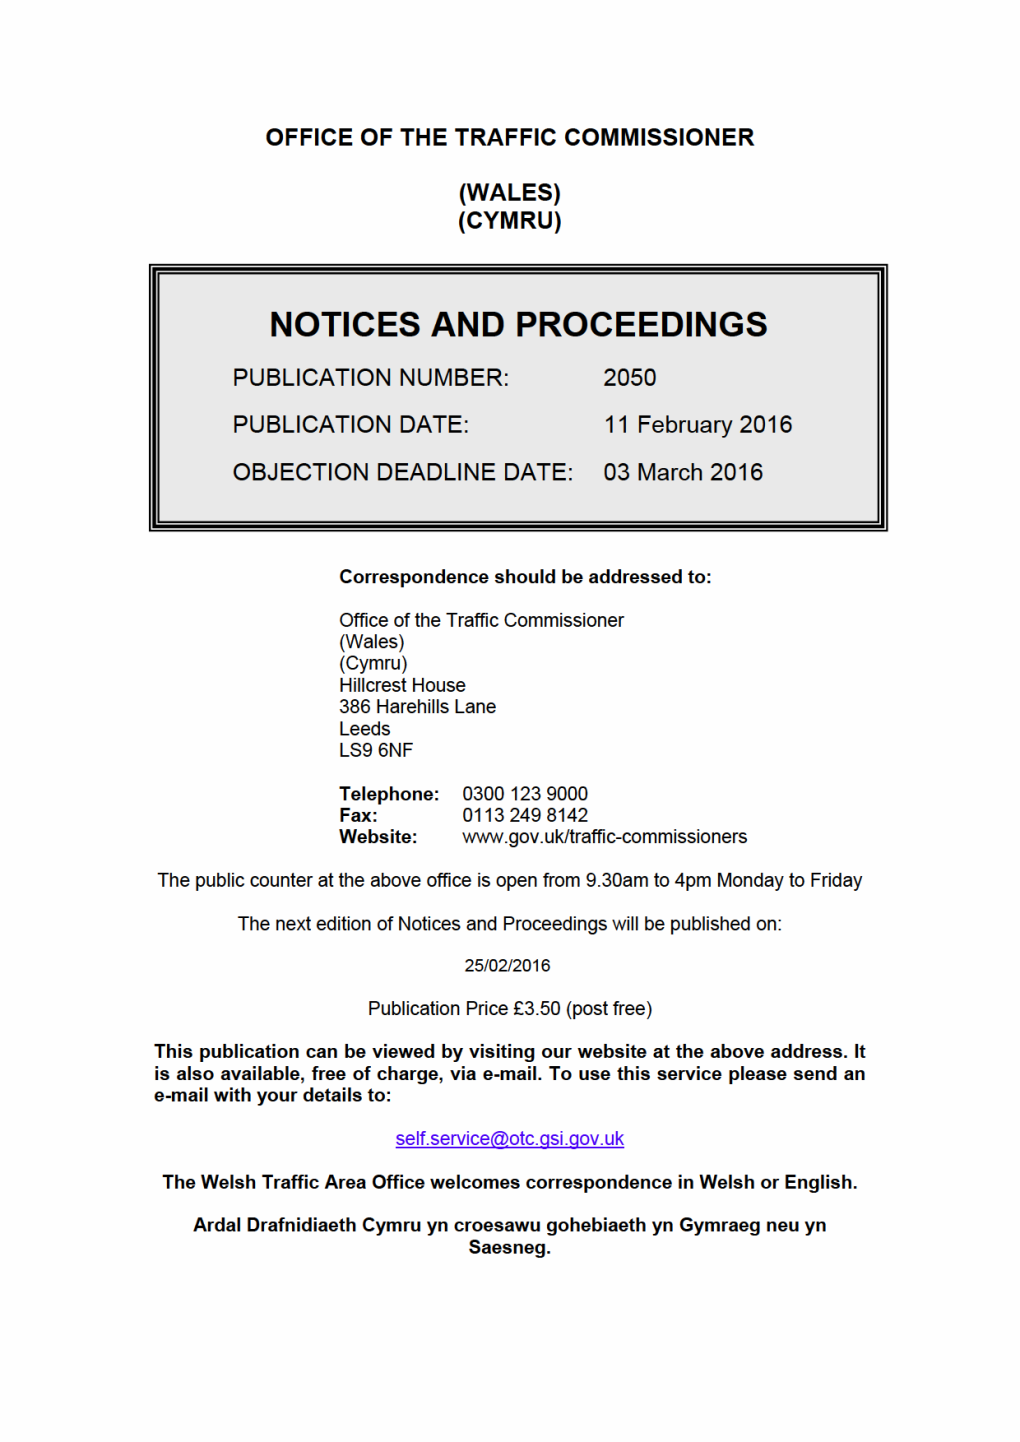 NOTICES and PROCEEDINGS 11 February 2016